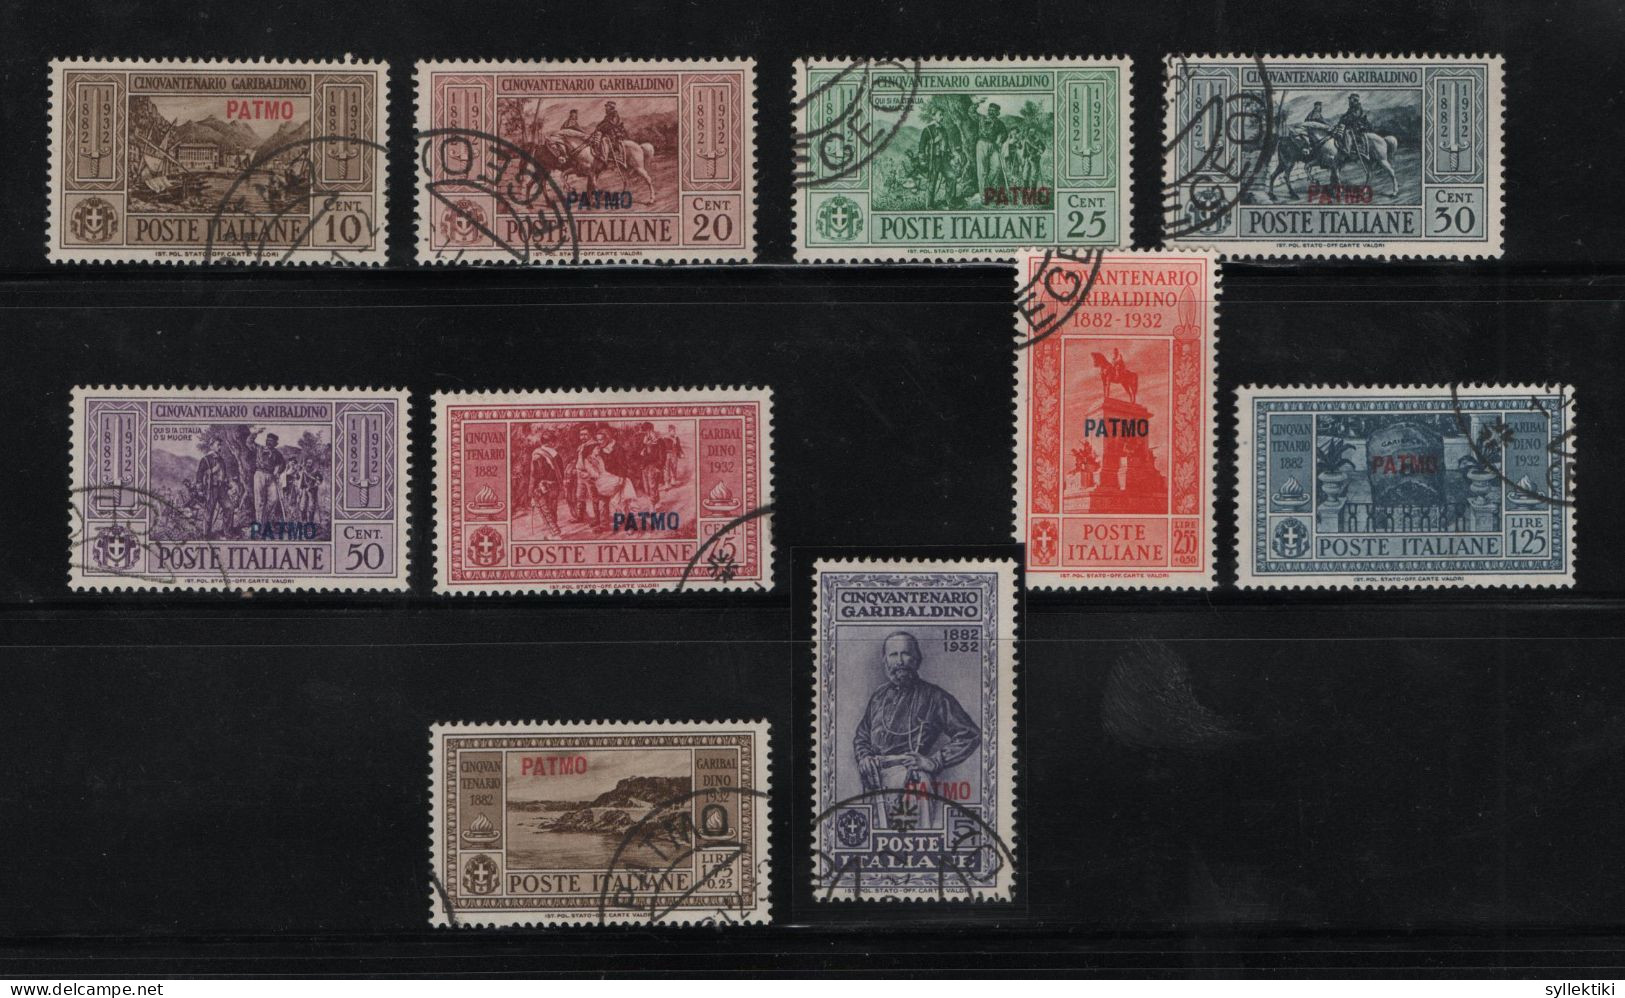 GREECE 1932 DODECANESE GARIBALDI ISSUE PATMO OVERPRINT COMPLETE SET USD STAMPS   HELLAS No 108XI - 117XI AND VALUE EURO - Dodecanese